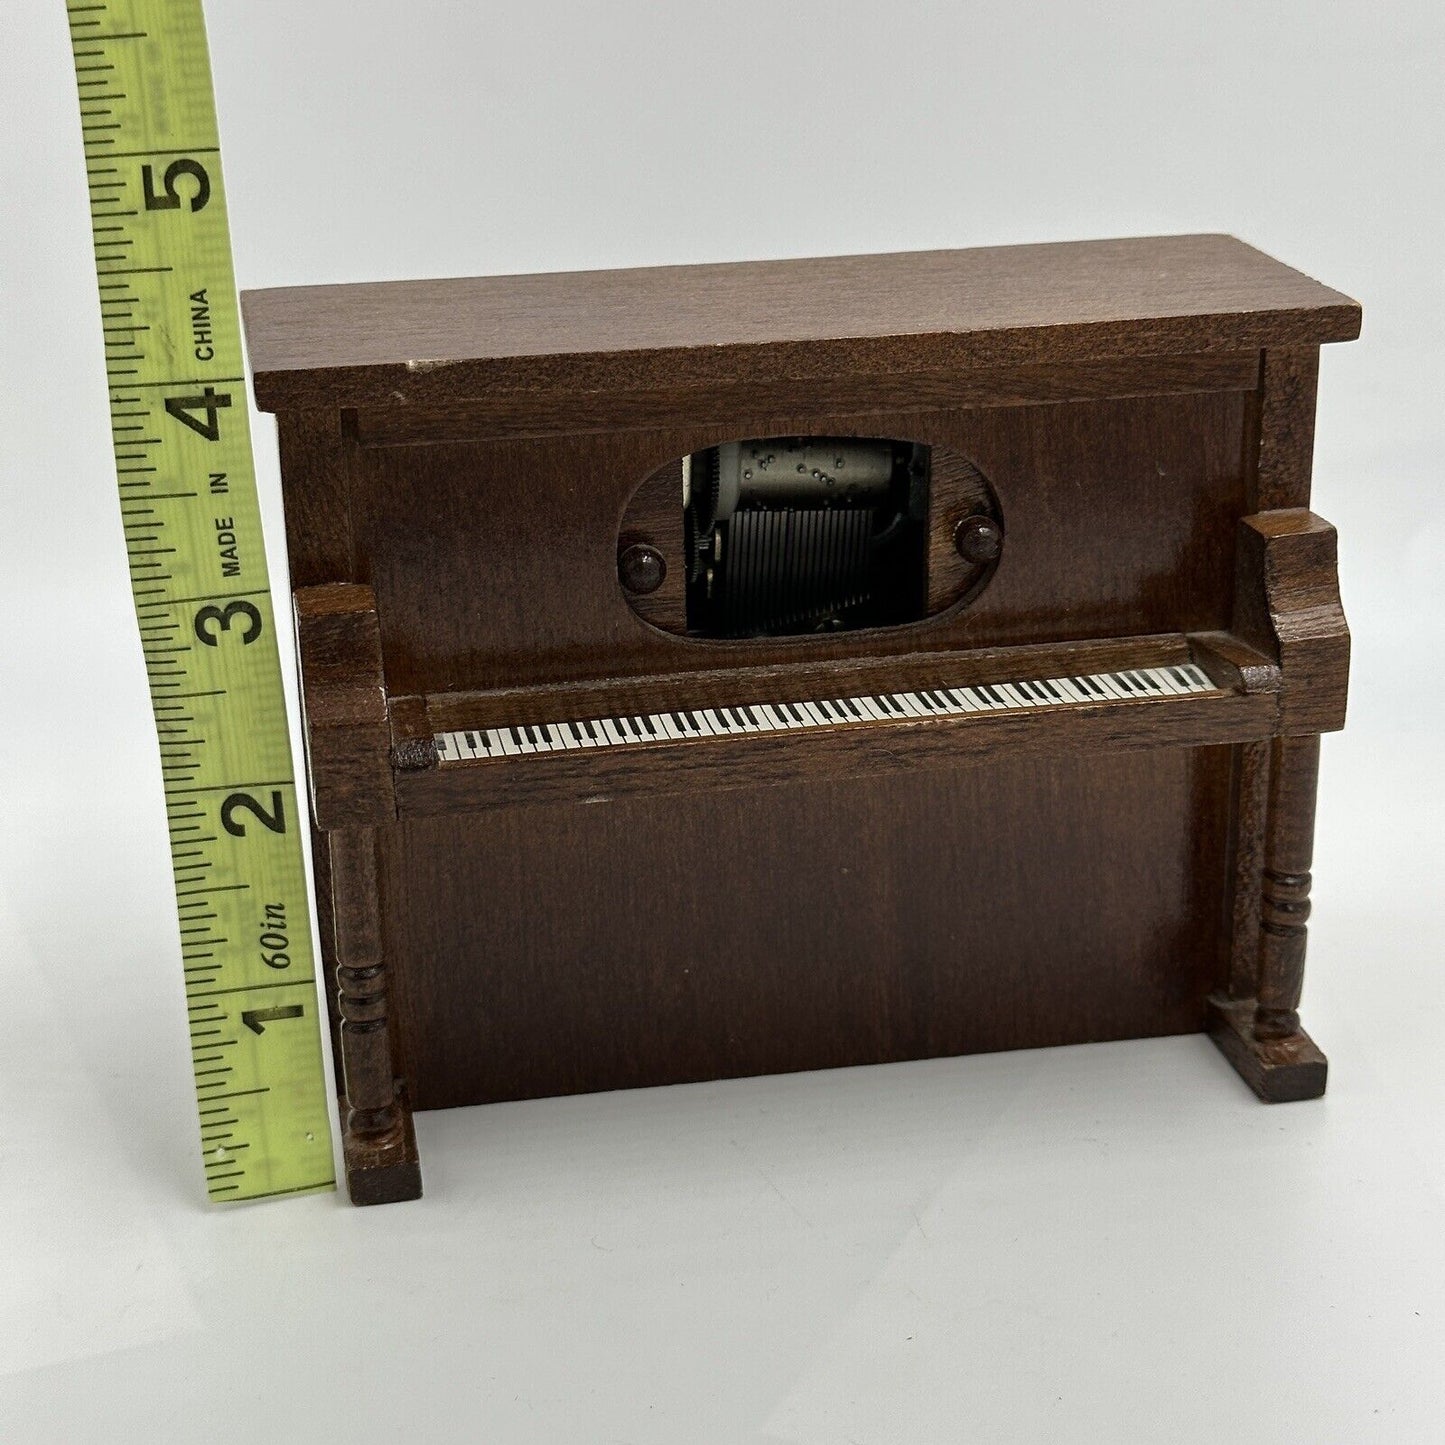 Dollhouse Miniatures Player Piano With Music Box Entertainer 1:12 Scale